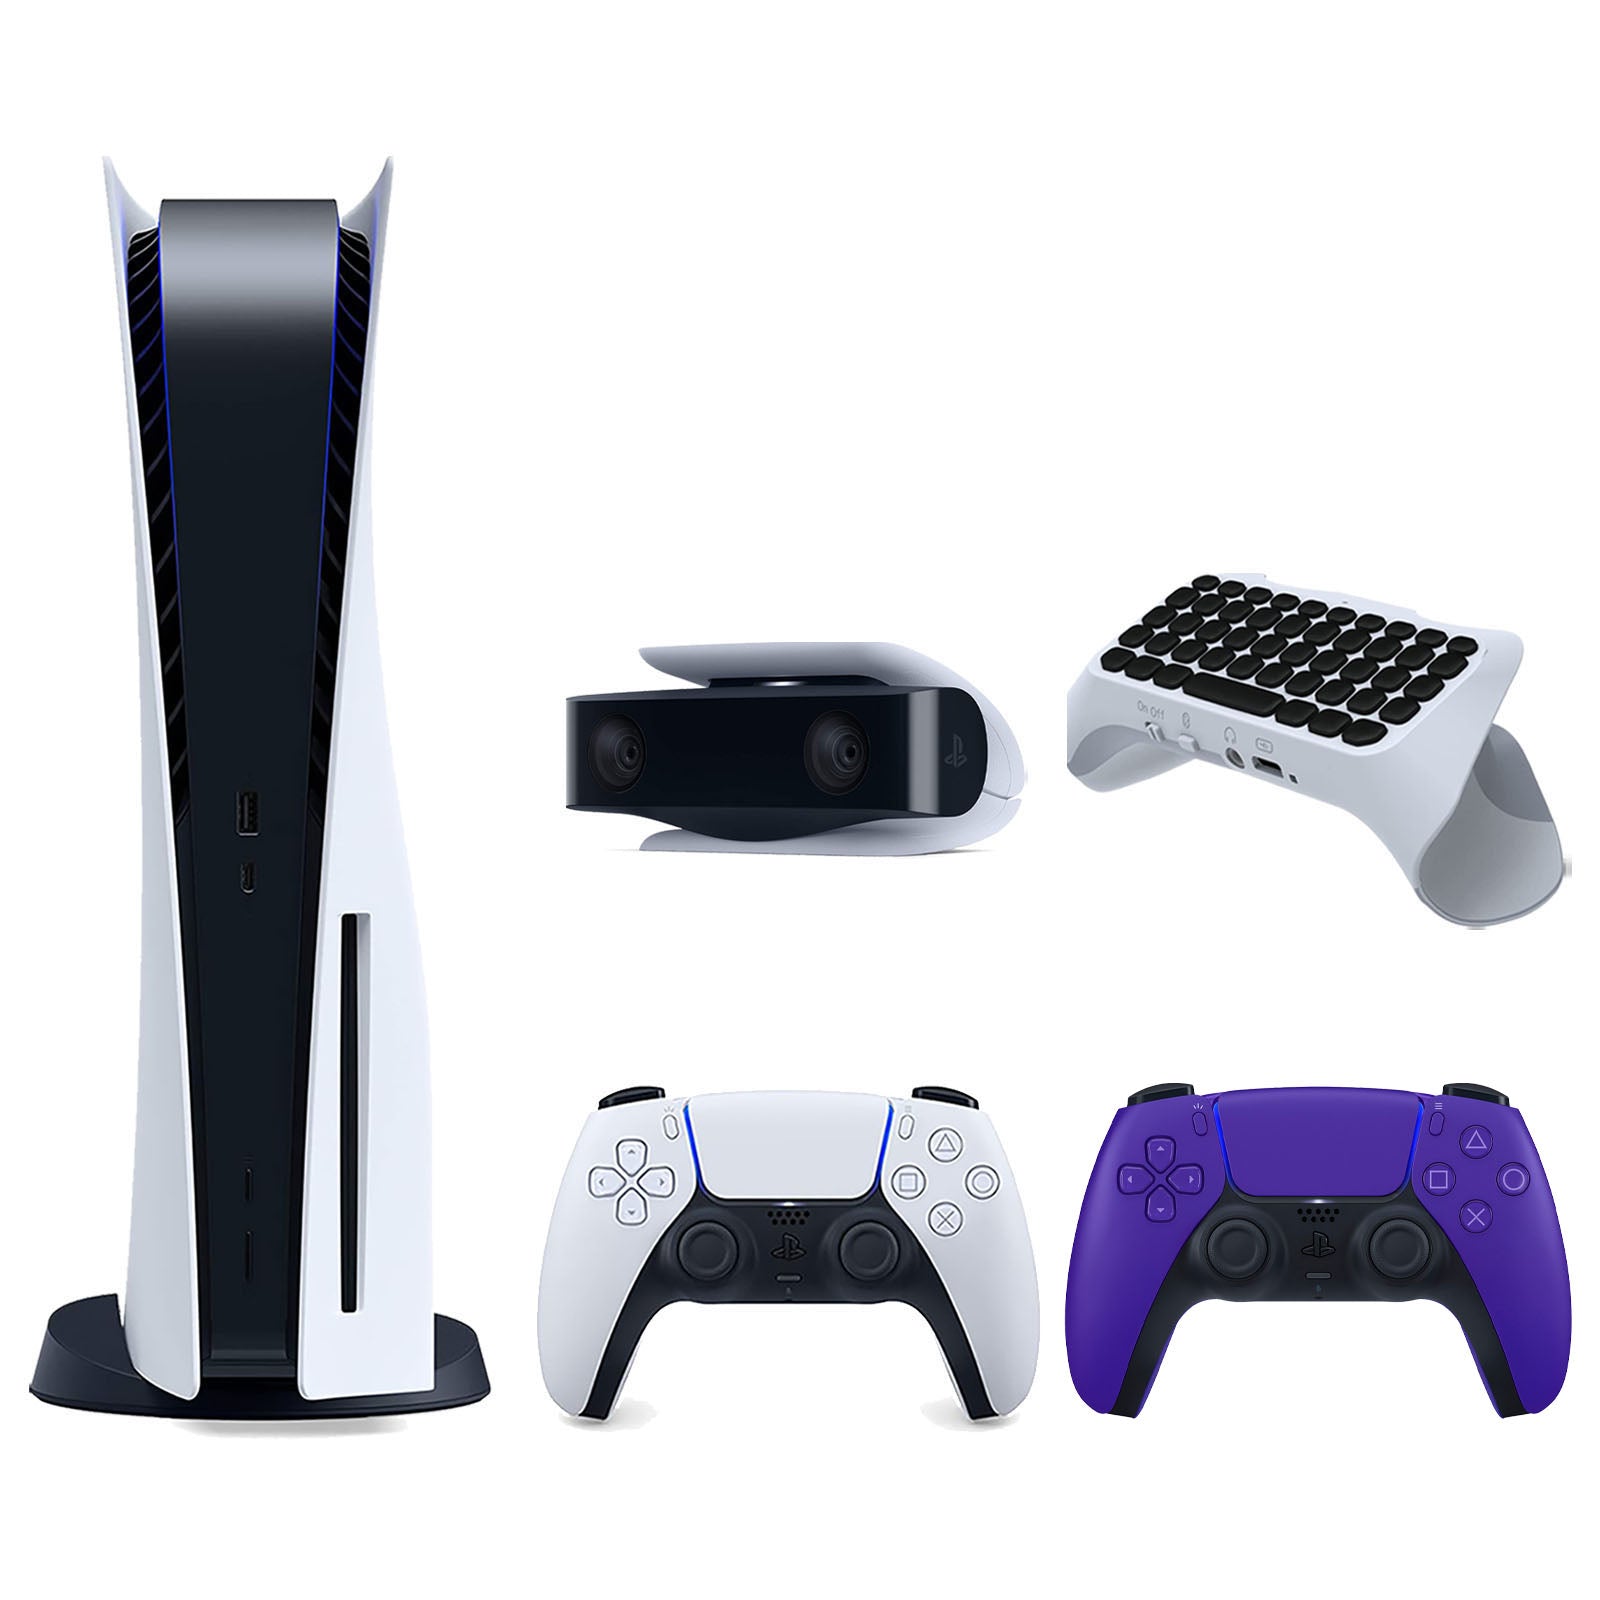 Sony Playstation 5 Disc Version Console with Extra Purple Controller, 1080p HD Camera and Surge QuickType 2.0 Wireless PS5 Controller Keypad Bundle - Pro-Distributing